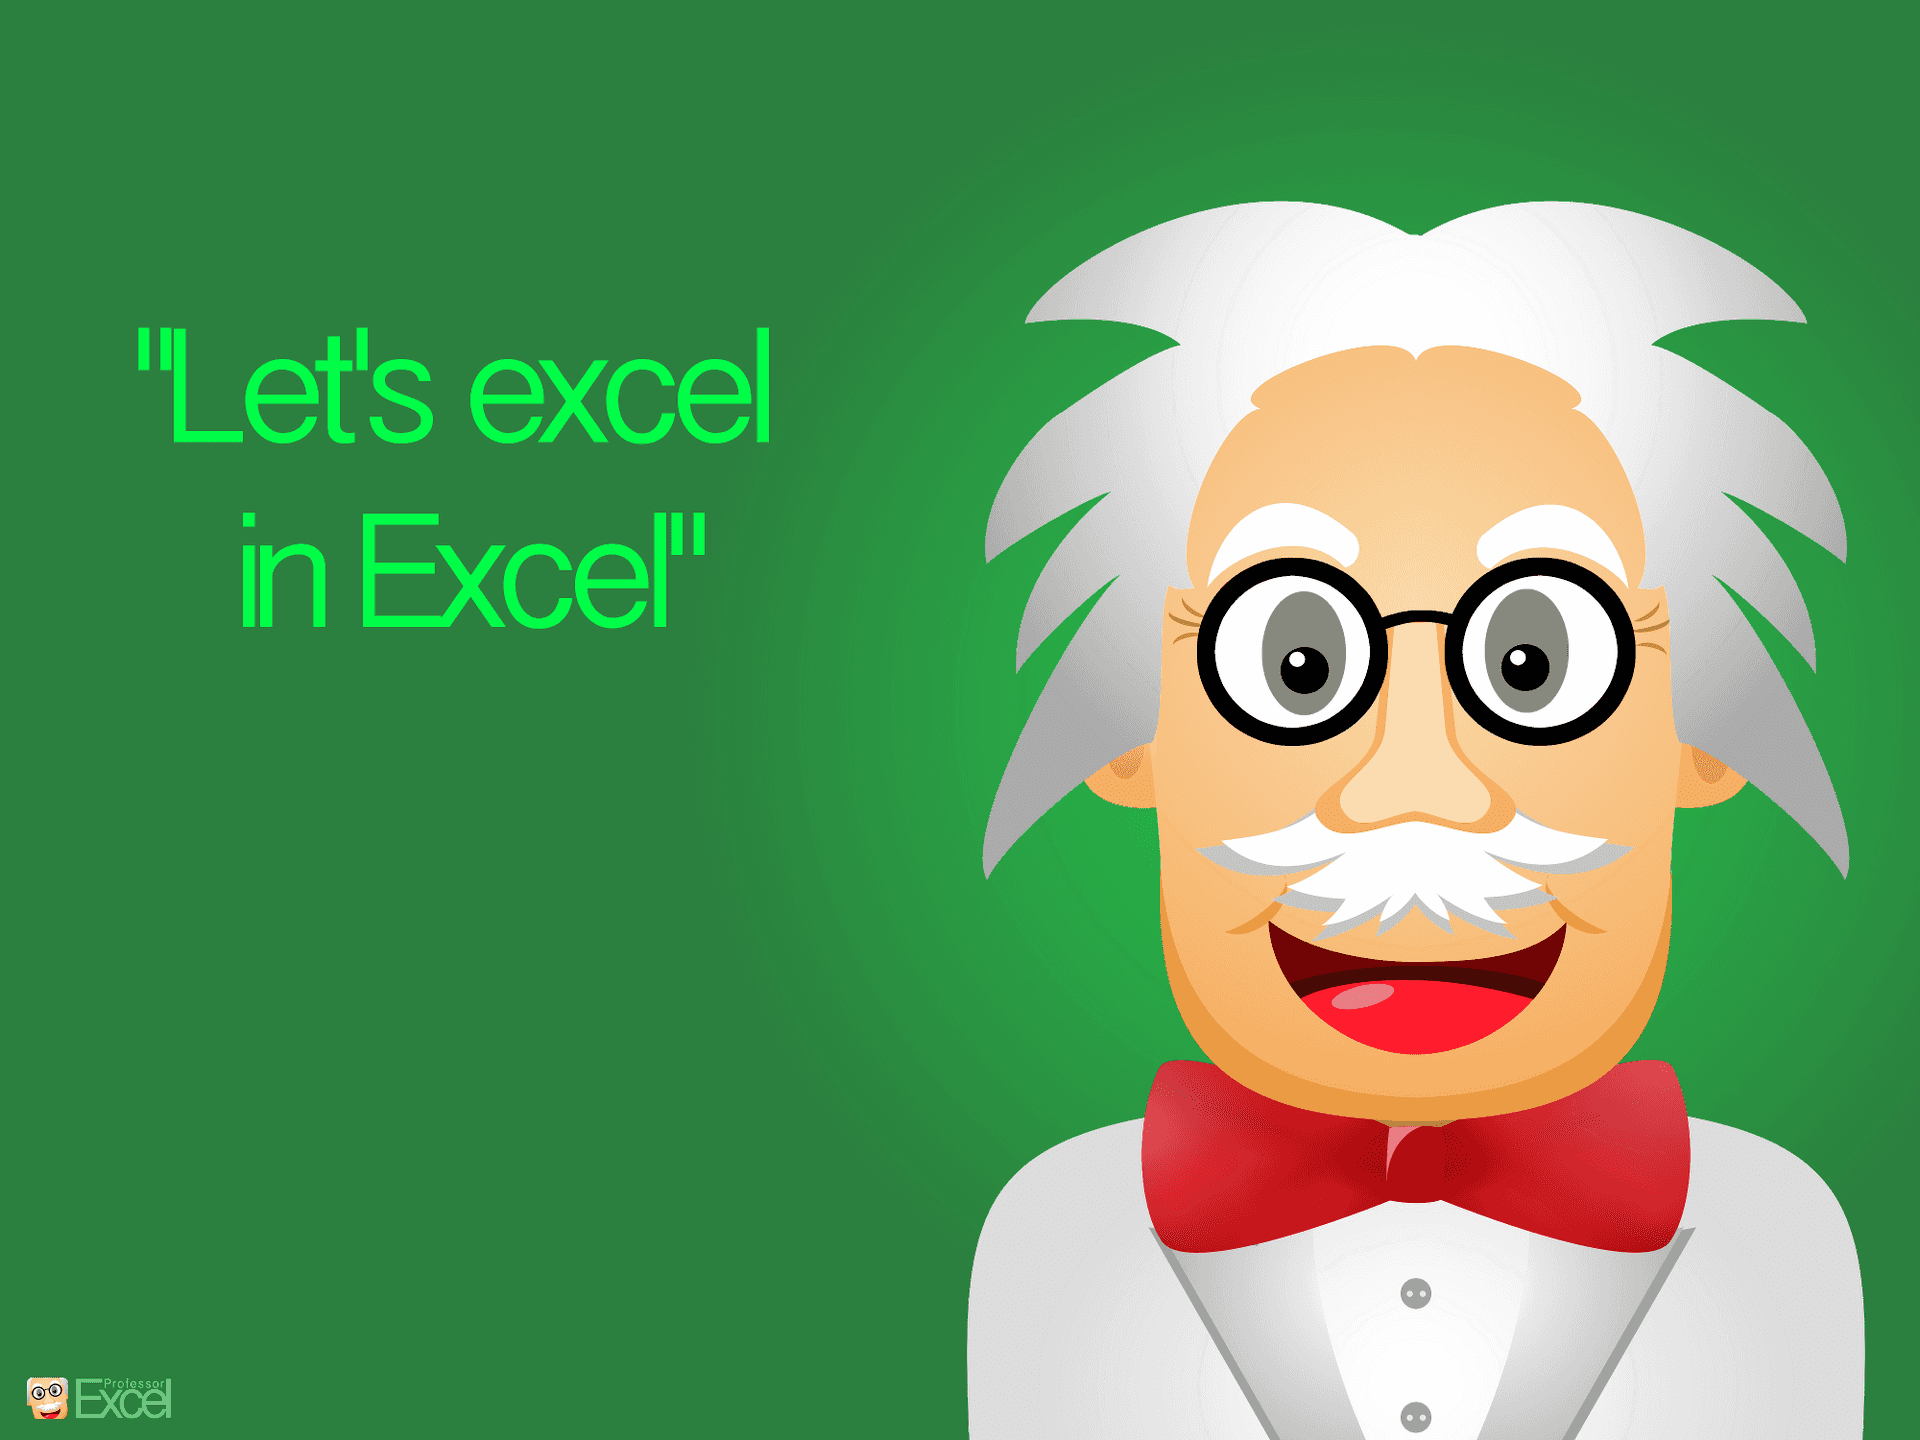 A Cartoon Character With Glasses And A Hat Says Let's Excel In Excel